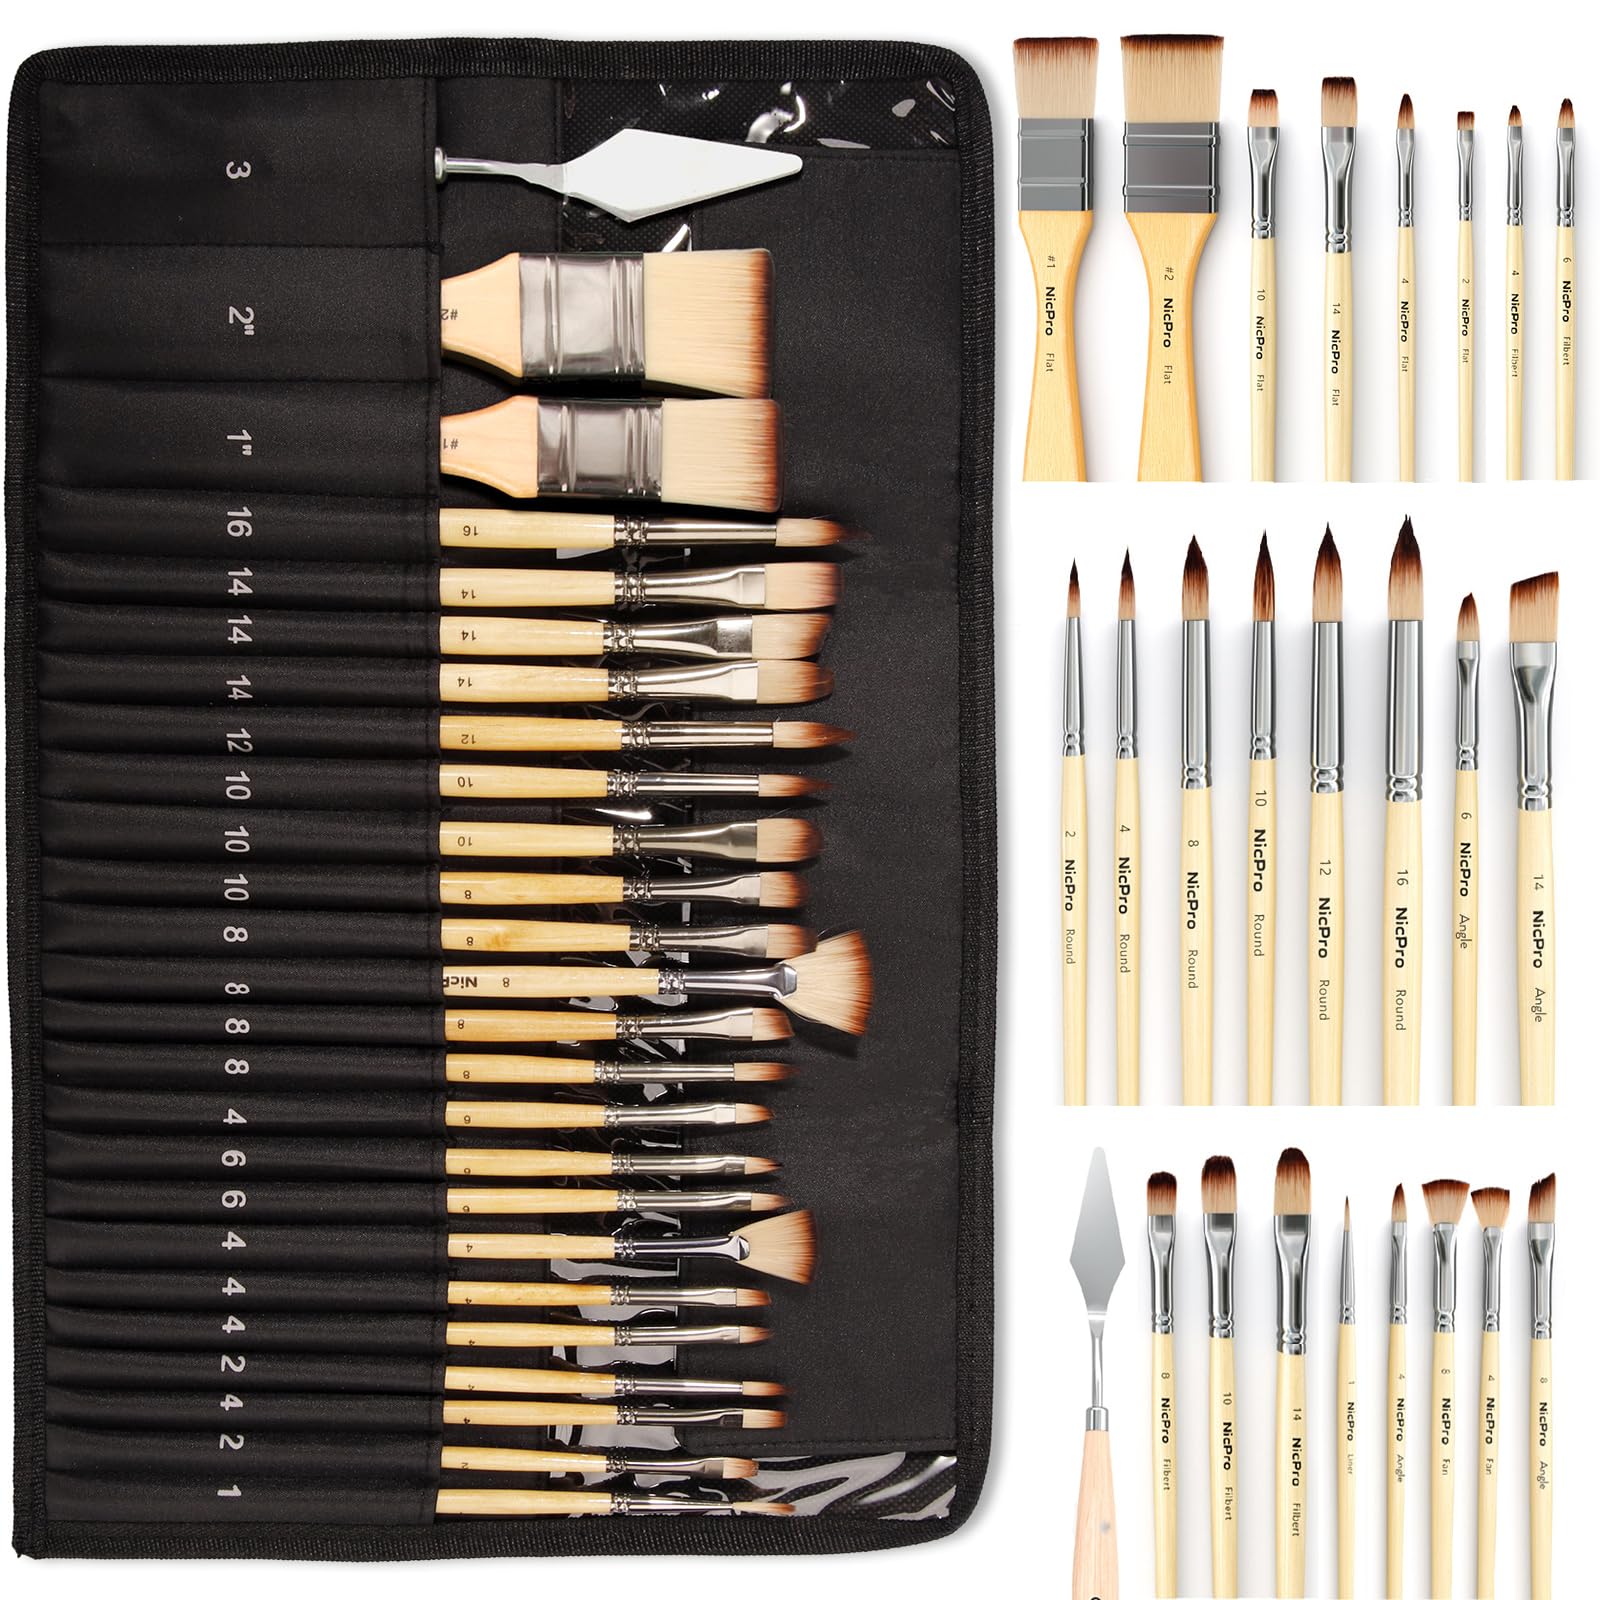 Nicpro 26pcs Paint Brush Set, Professional Paintbrushes with Palette Knife and Cloth Roll, Artist Paint Brushes for Acrylic Painting, Oil, Watercolor & Gouache, Adults Kids Art Painting Tools Supplies